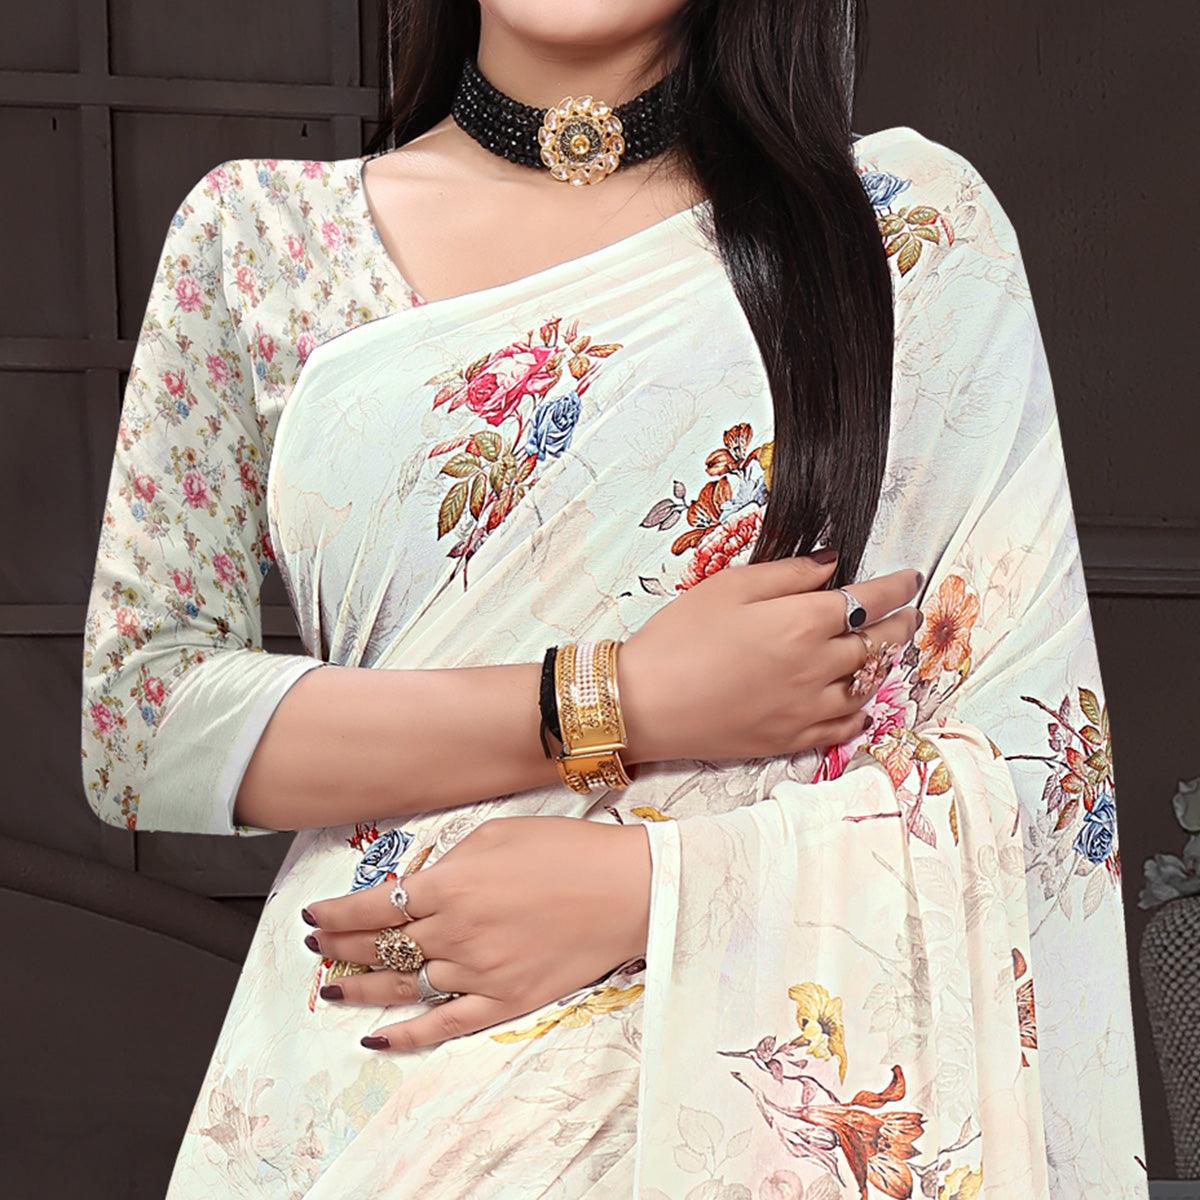 Off-White Casual Wear Floral Printed Georgette Saree - Peachmode